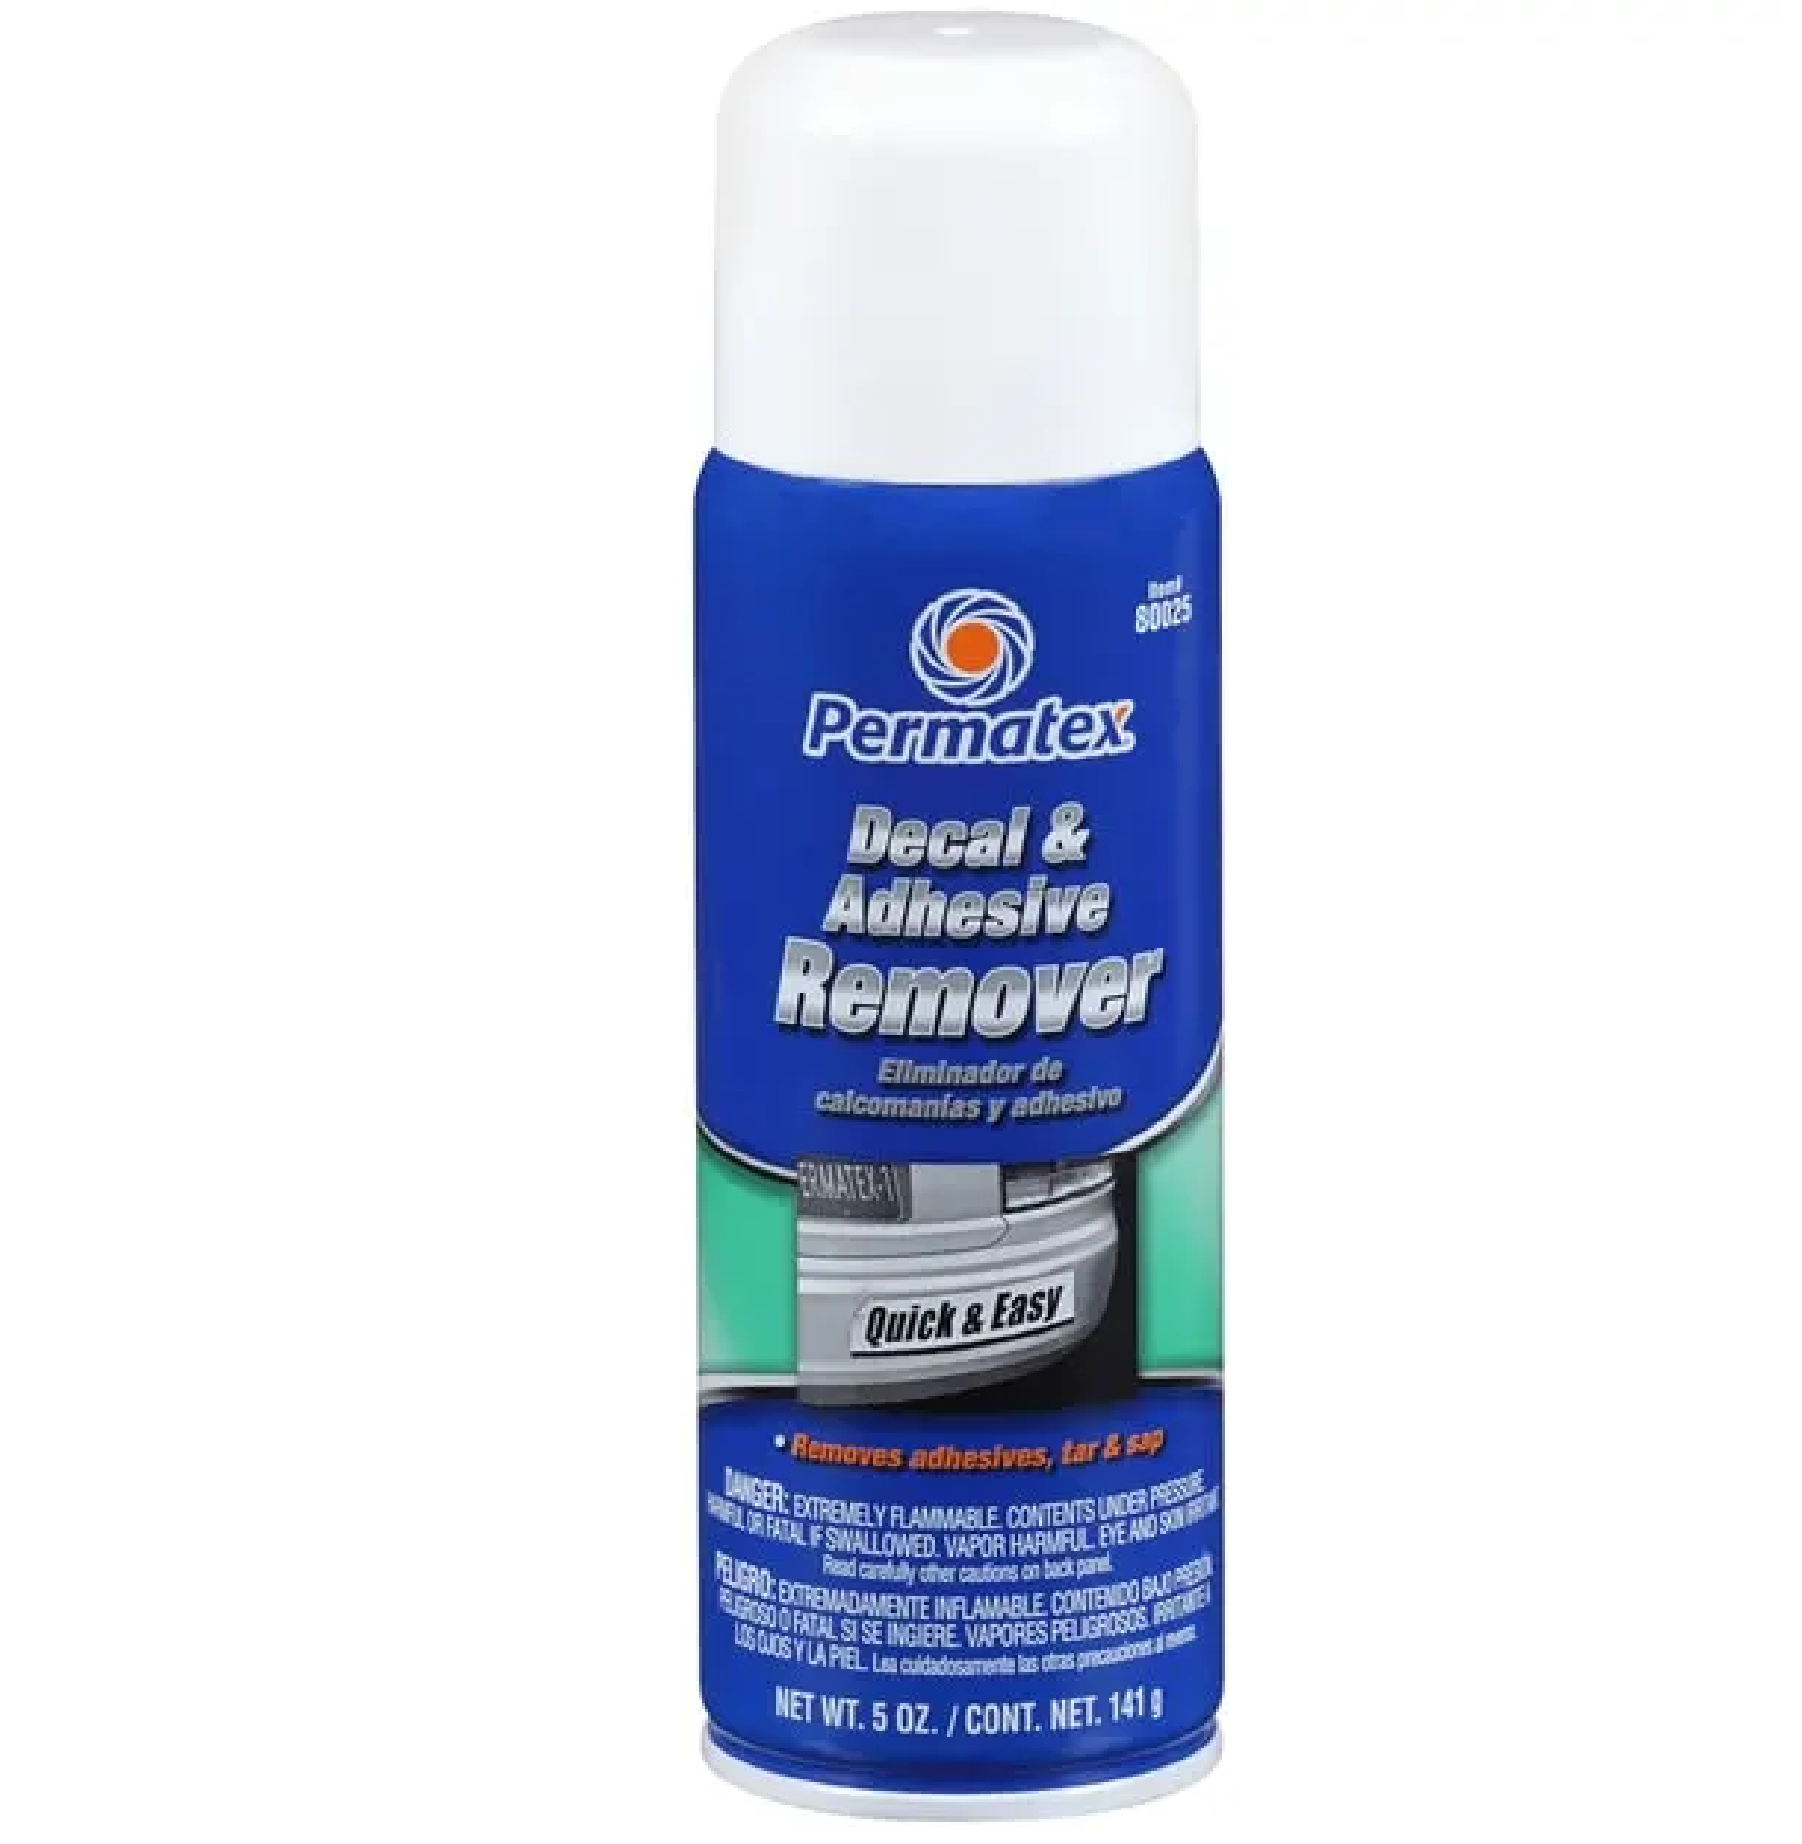 Permatex 80025 Decal And Adhesive Remover 141G